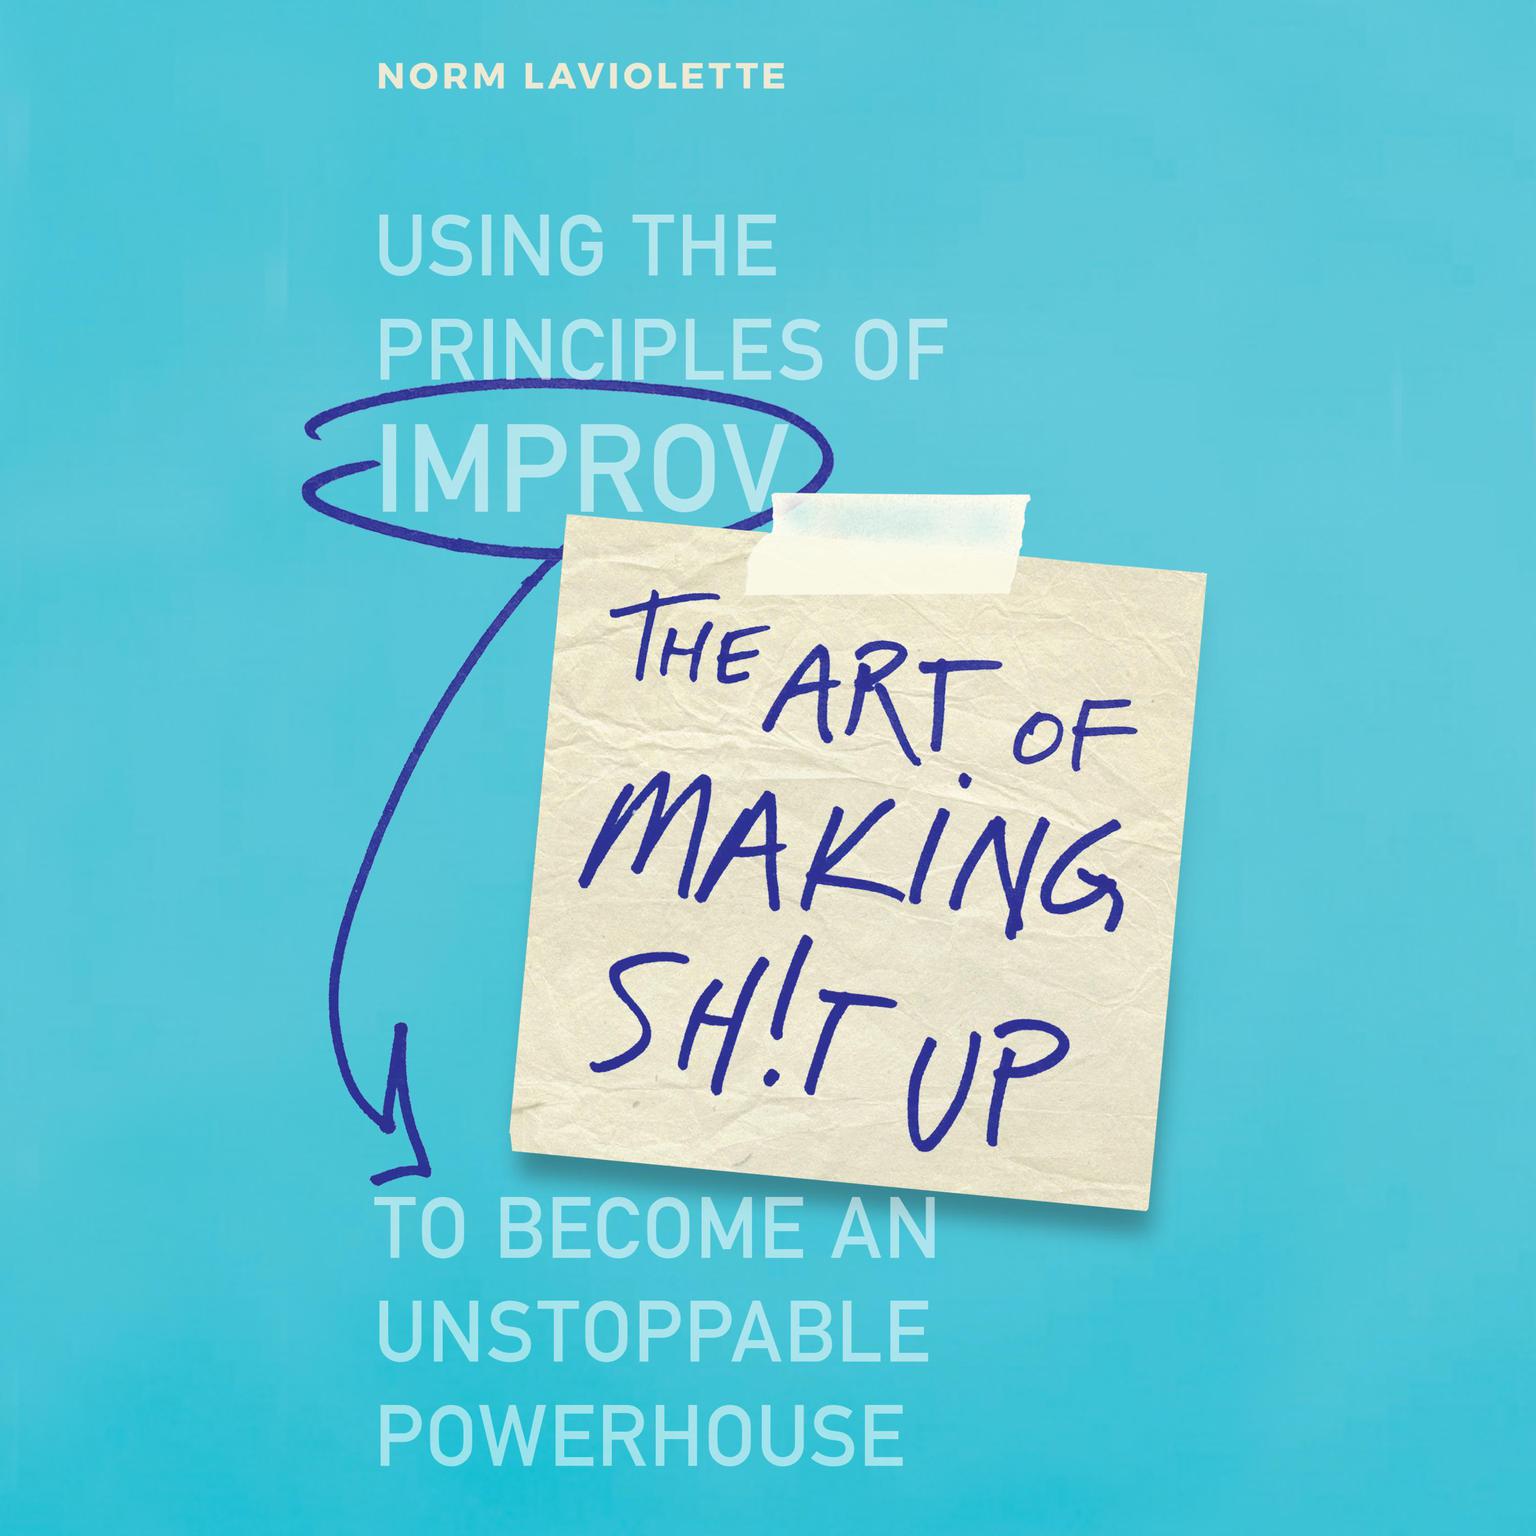 The Art of Making Sh!t Up: Using the Principles of Improv to Become an Unstoppable Powerhouse Audiobook, by Norm Laviolette